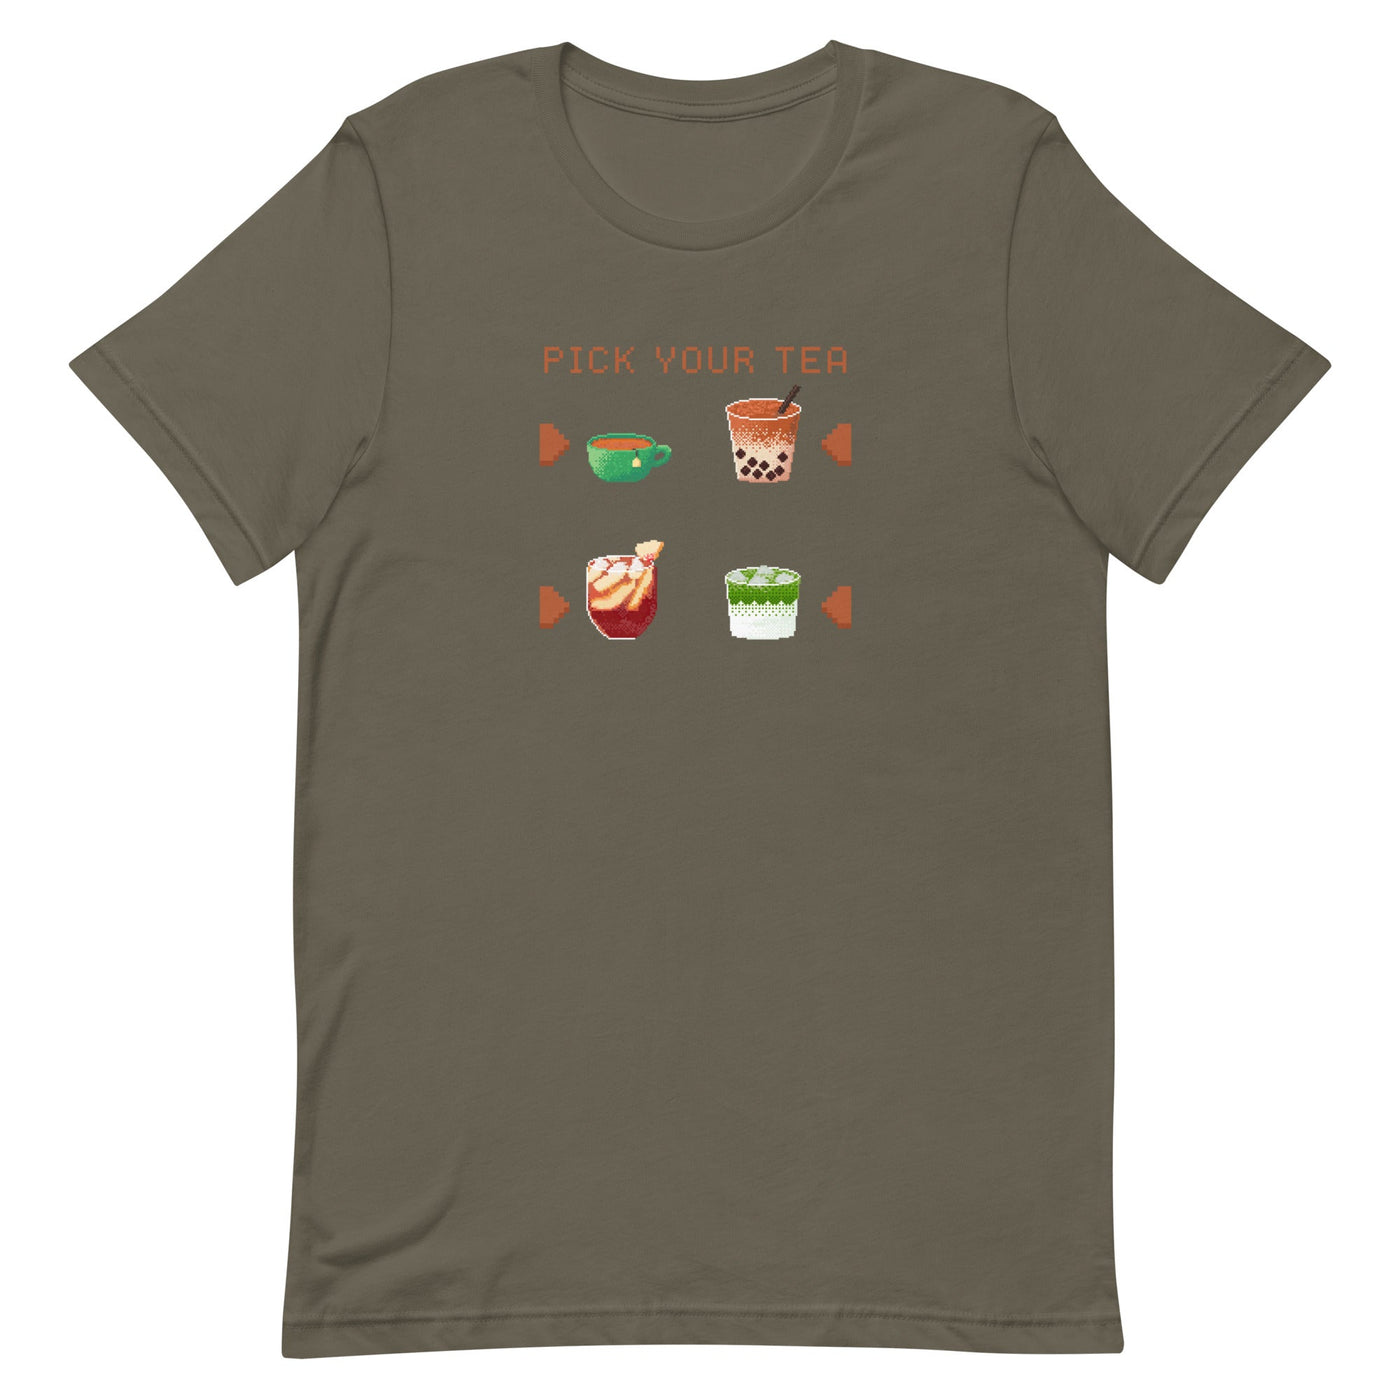 Pick Your Tea | Unisex t-shirt | Cozy Gamer Threads & Thistles Inventory Army S 